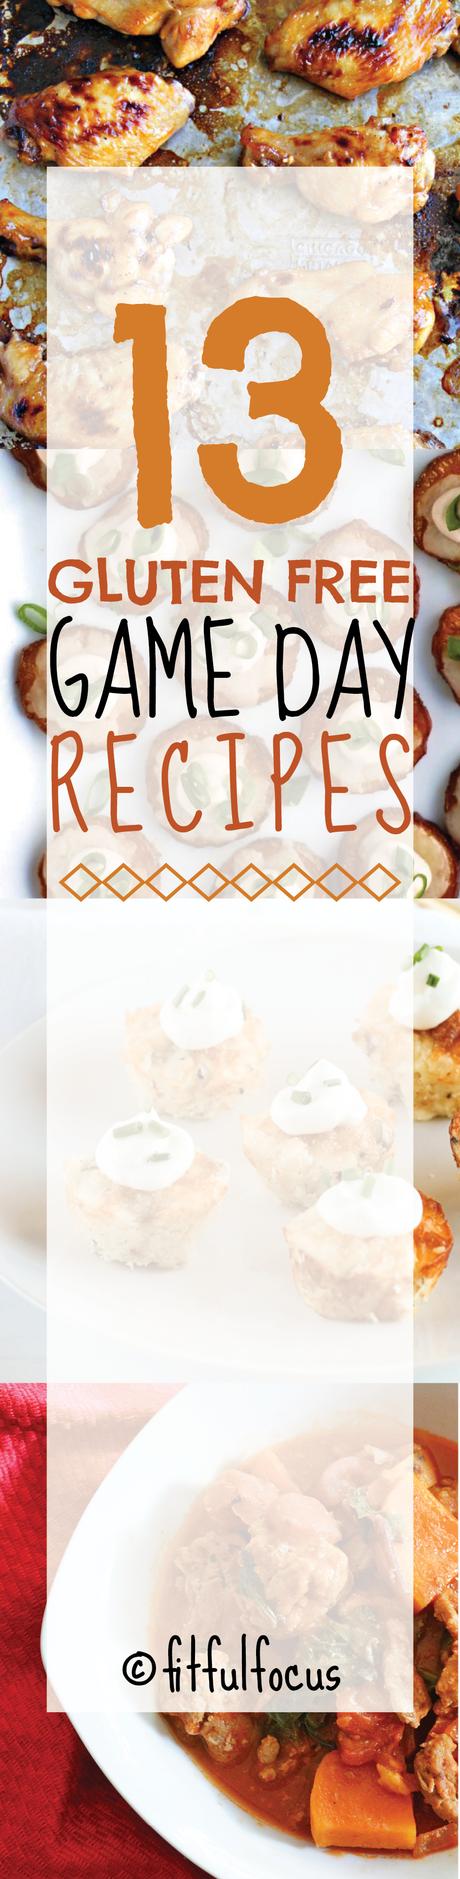 13 Gluten Free Game Day Recipes